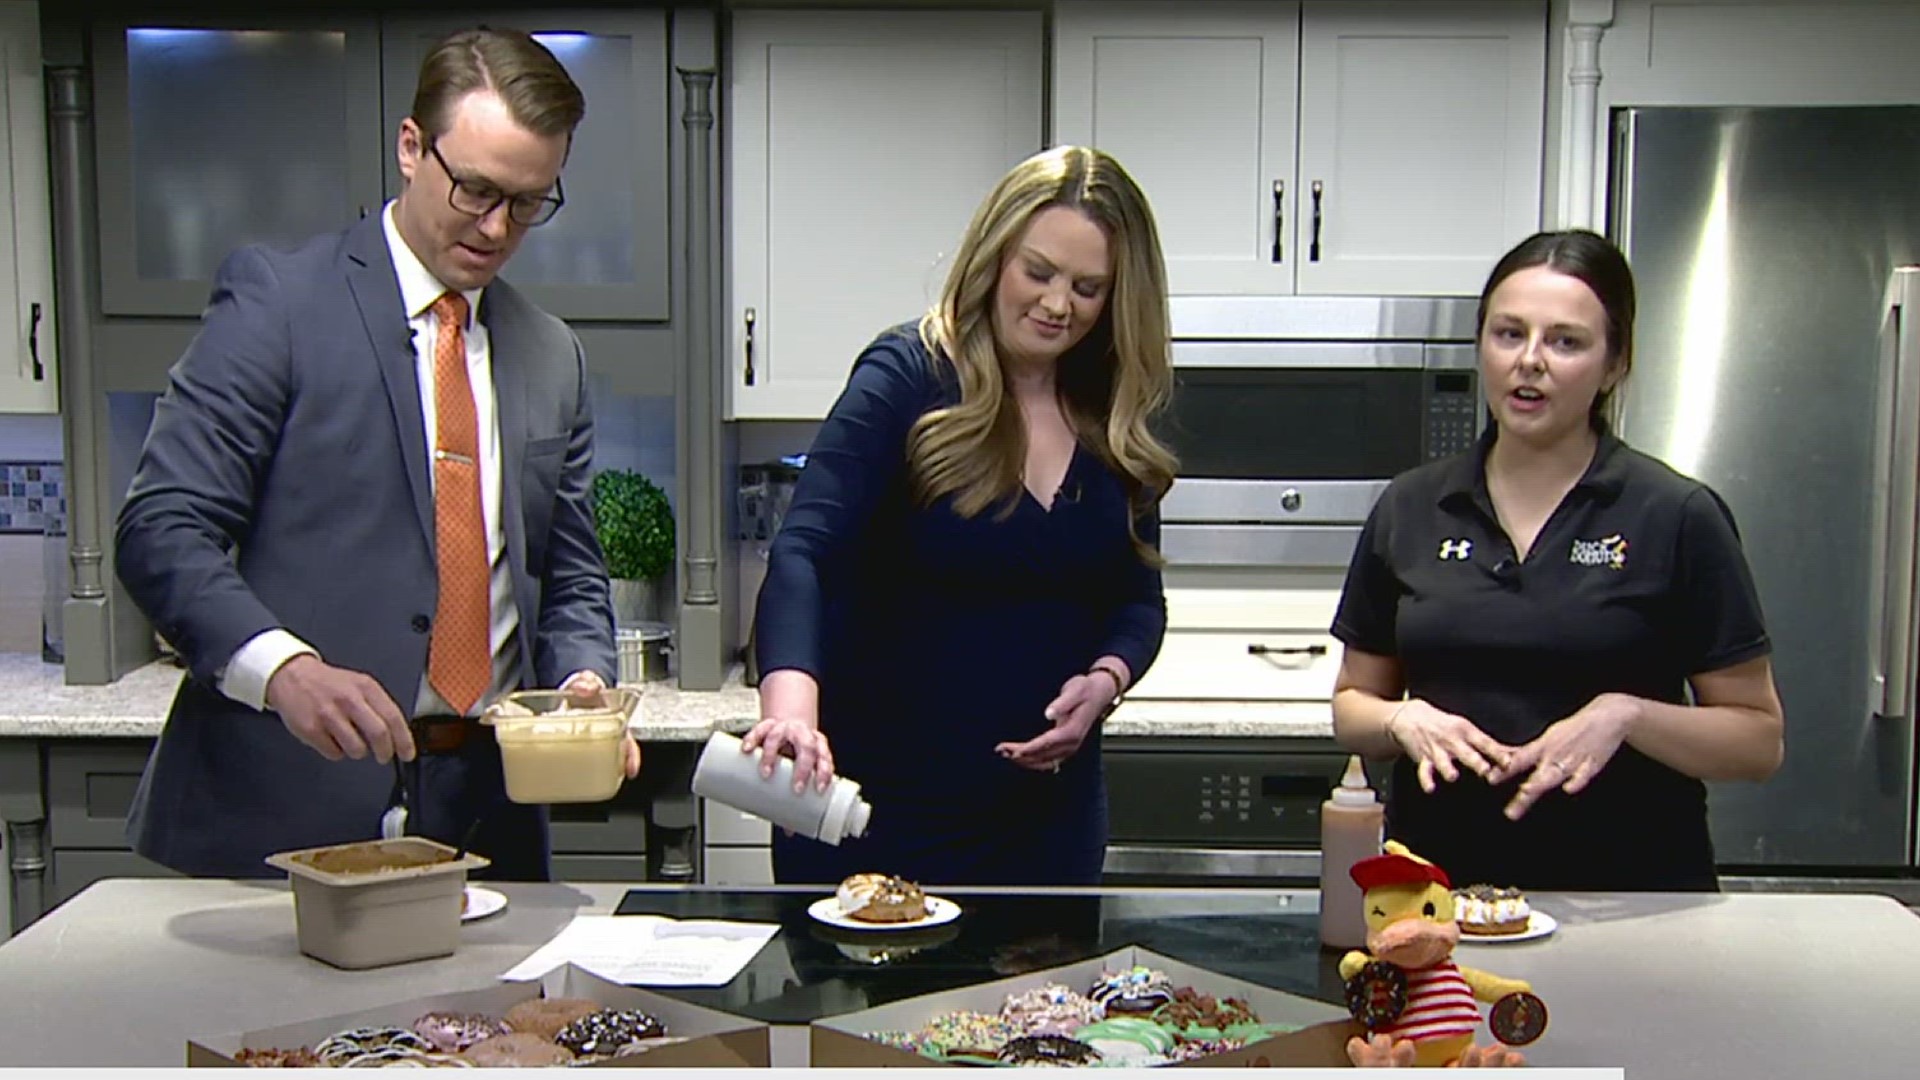 Duck Donuts stopped by the FOX43 studio to introduce their new Barista Box, an assortment of donuts with coffee-flavored toppings. The item is available until May 28